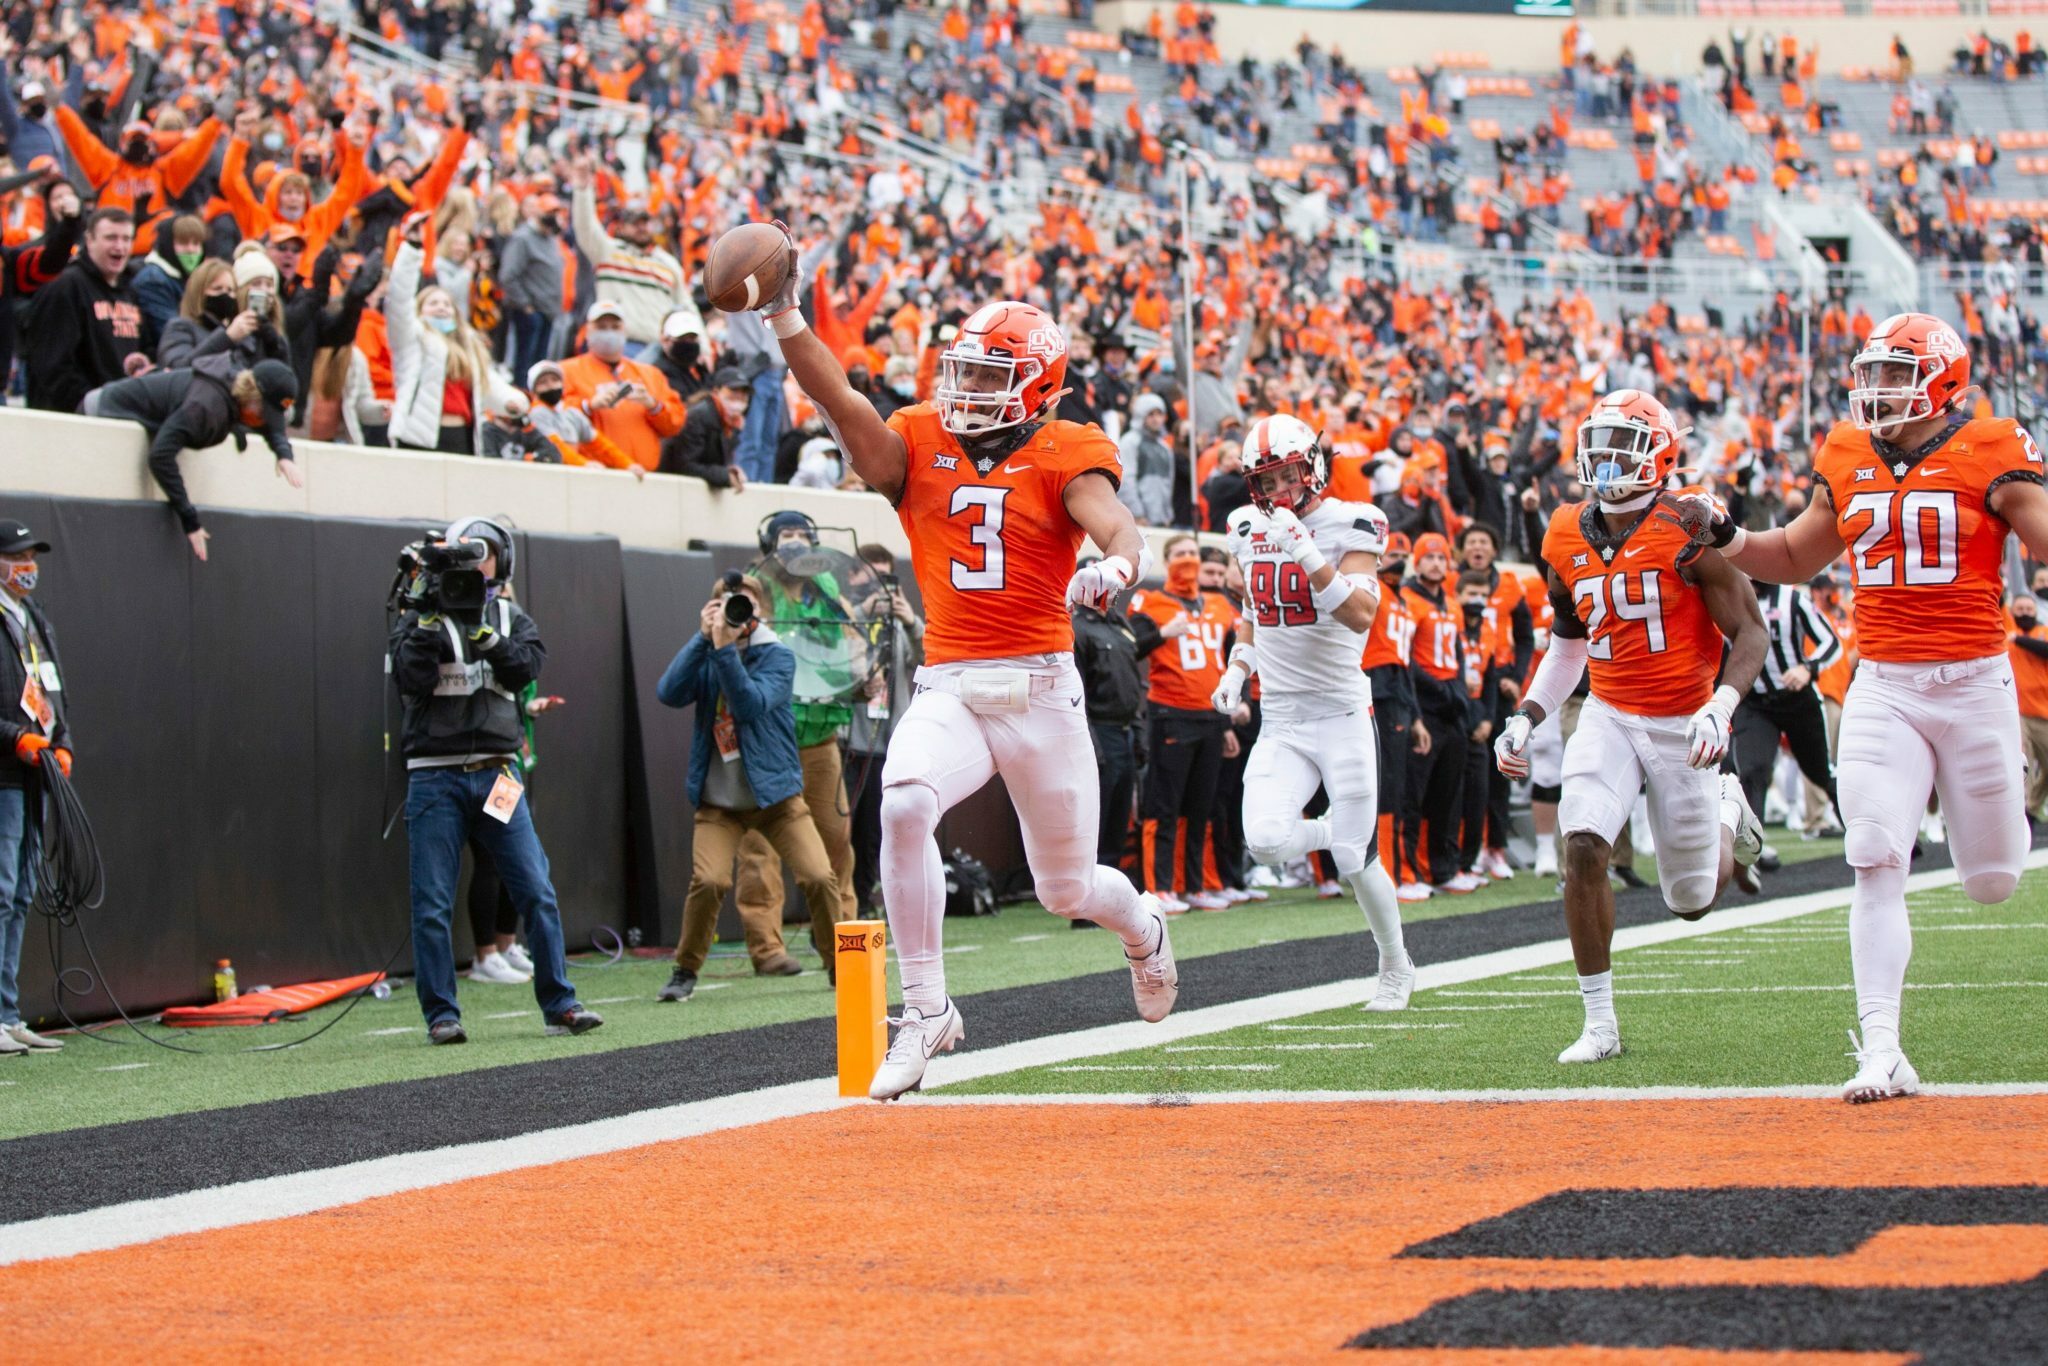 Kick Time, TV Details for OSU-TCU Game in Week 14 Announced | Pistols